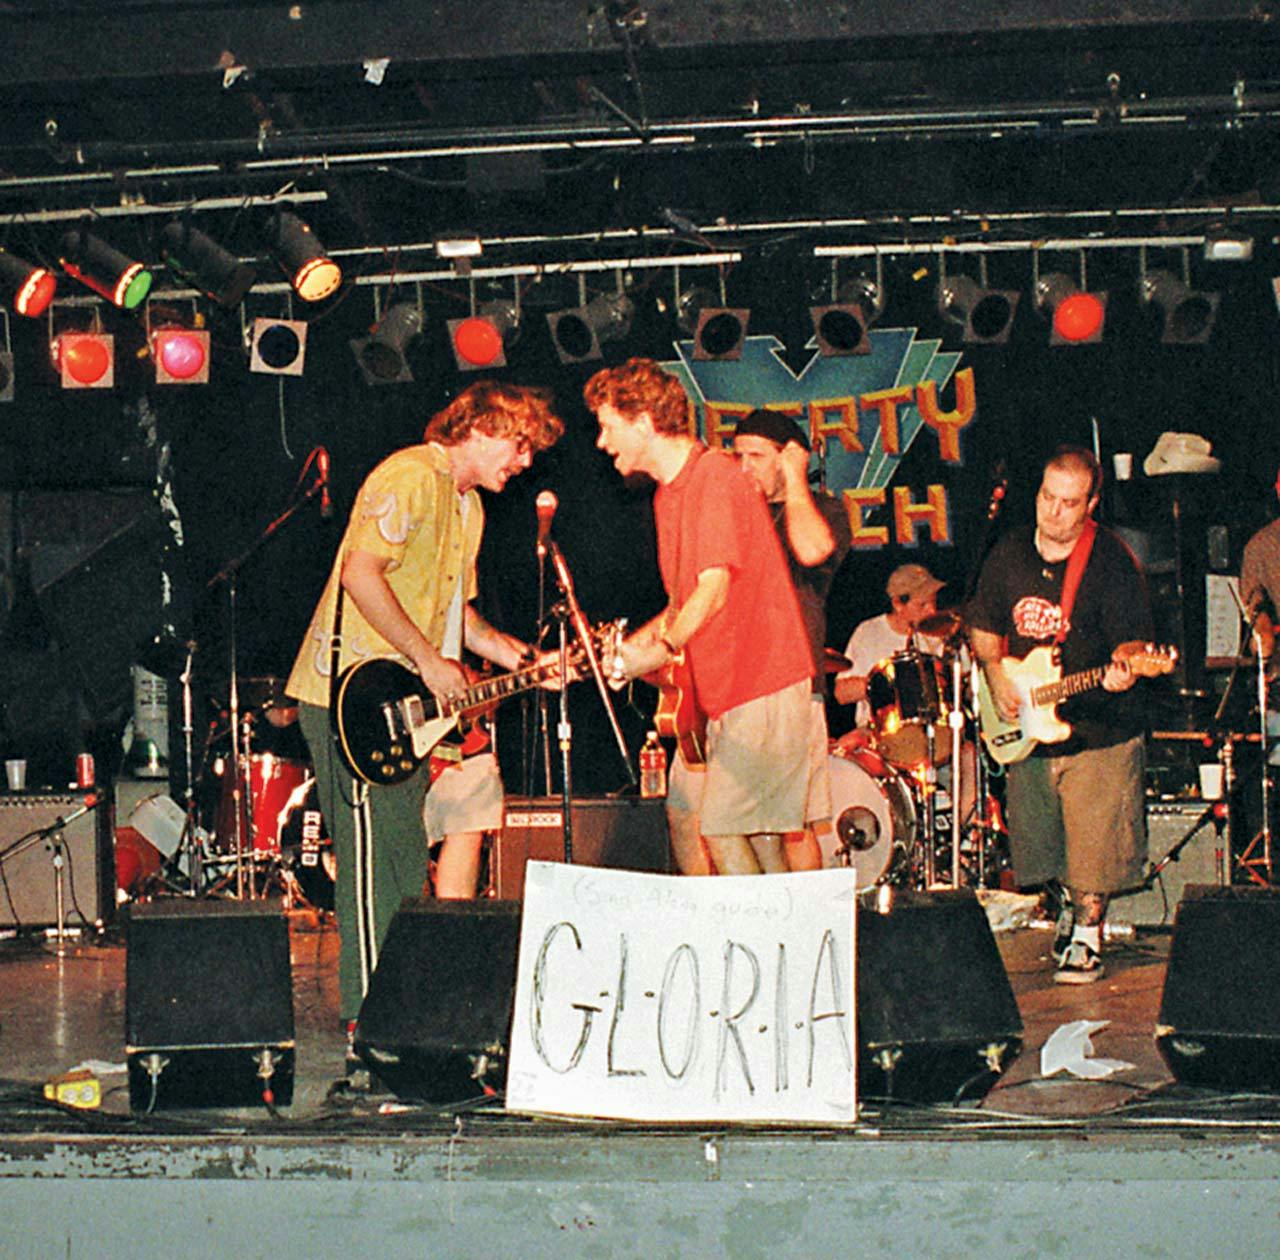 The author (wearing a red shirt) performing at the Gloriathon at Liberty Lunch in 1999.